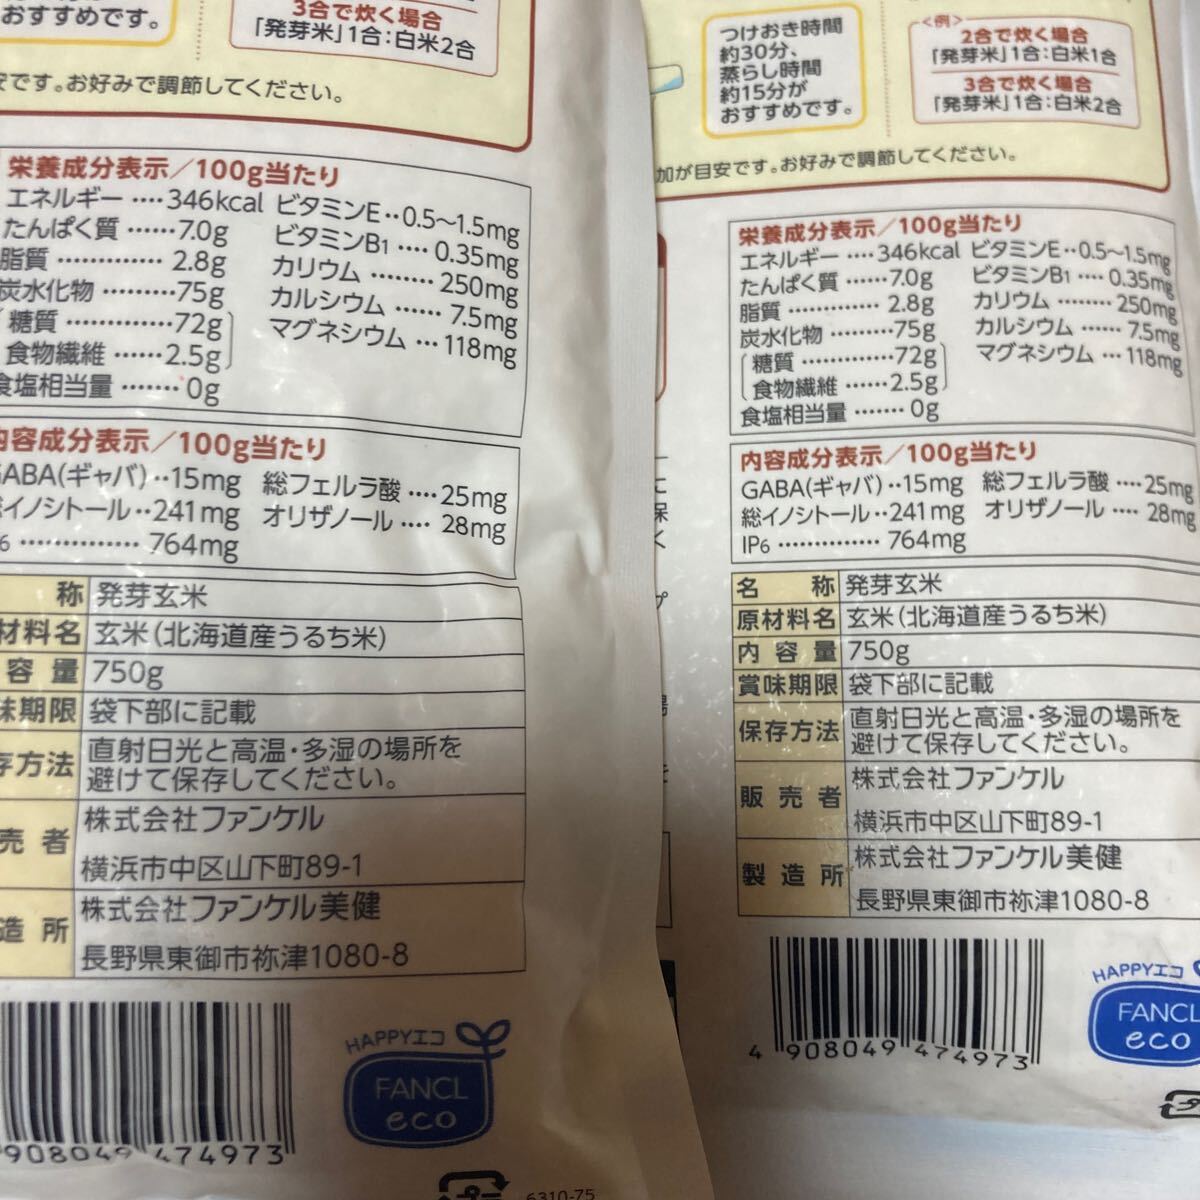  Fancl germination rice brown rice musenmai ... rice 750g×2 sack Hokkaido production FANCL coupon use free shipping prompt decision food rice set sale 